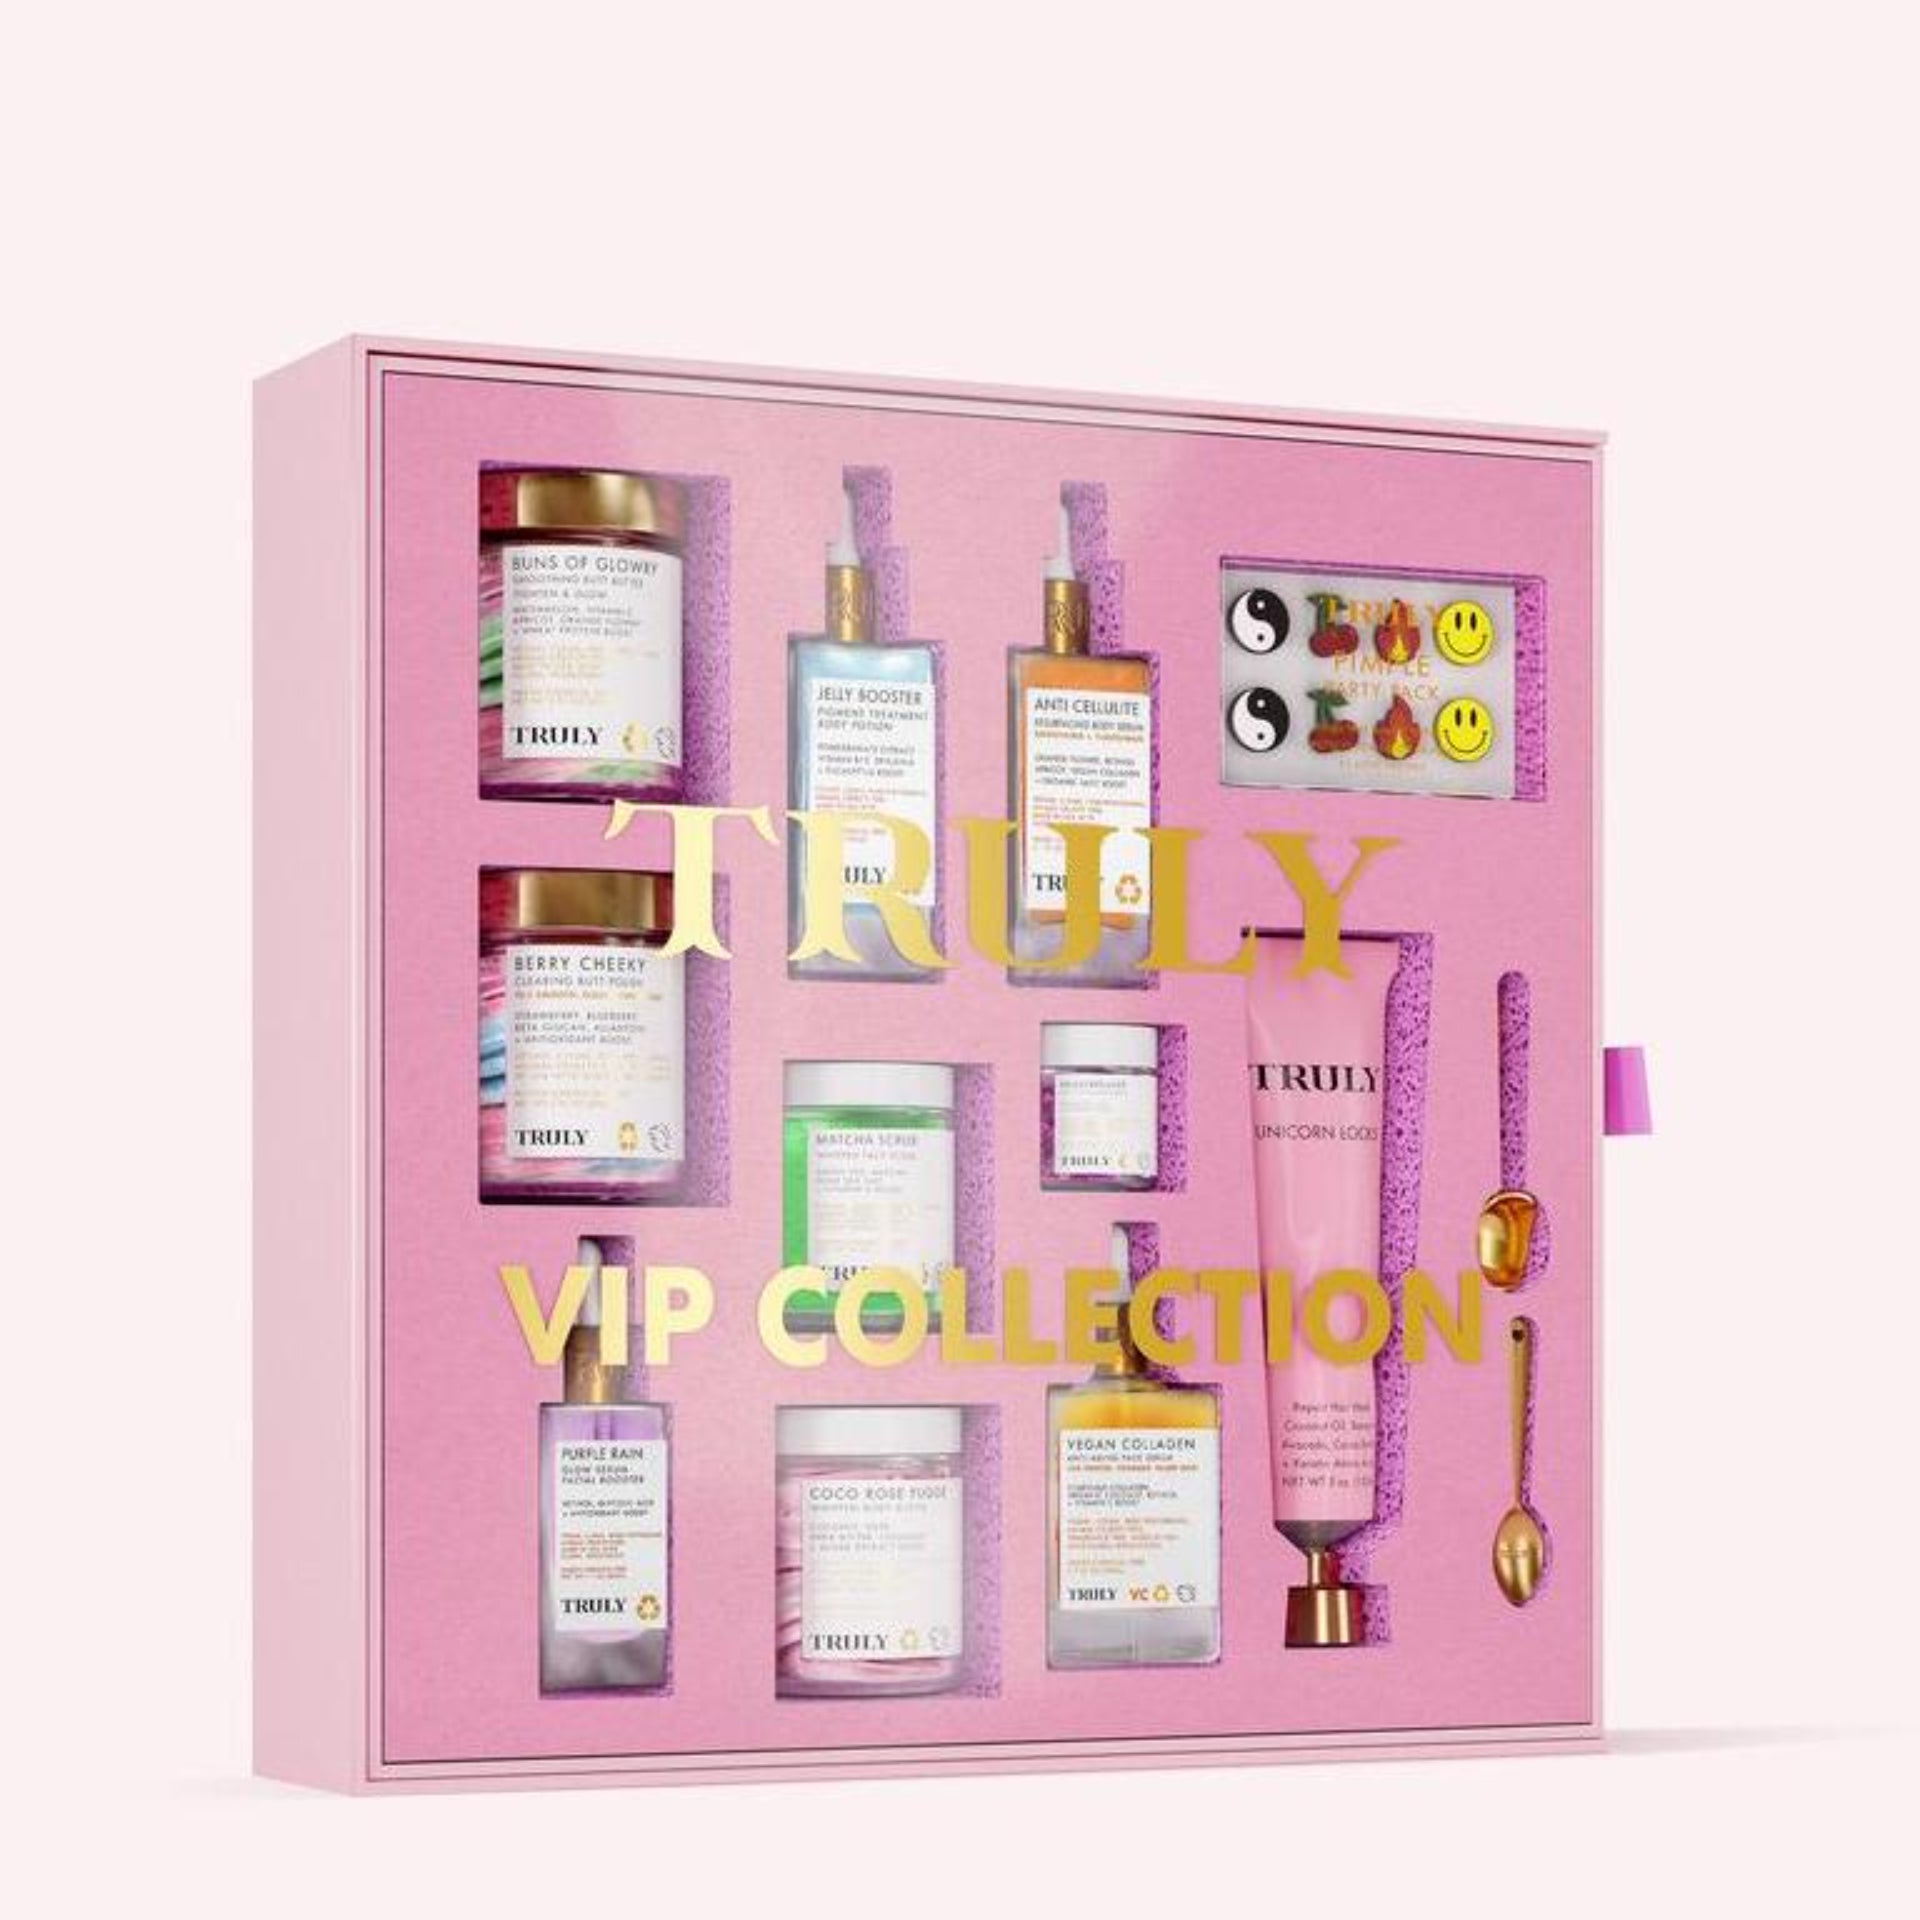 These 10 Beauty Sets Make The Best Holiday Gifts